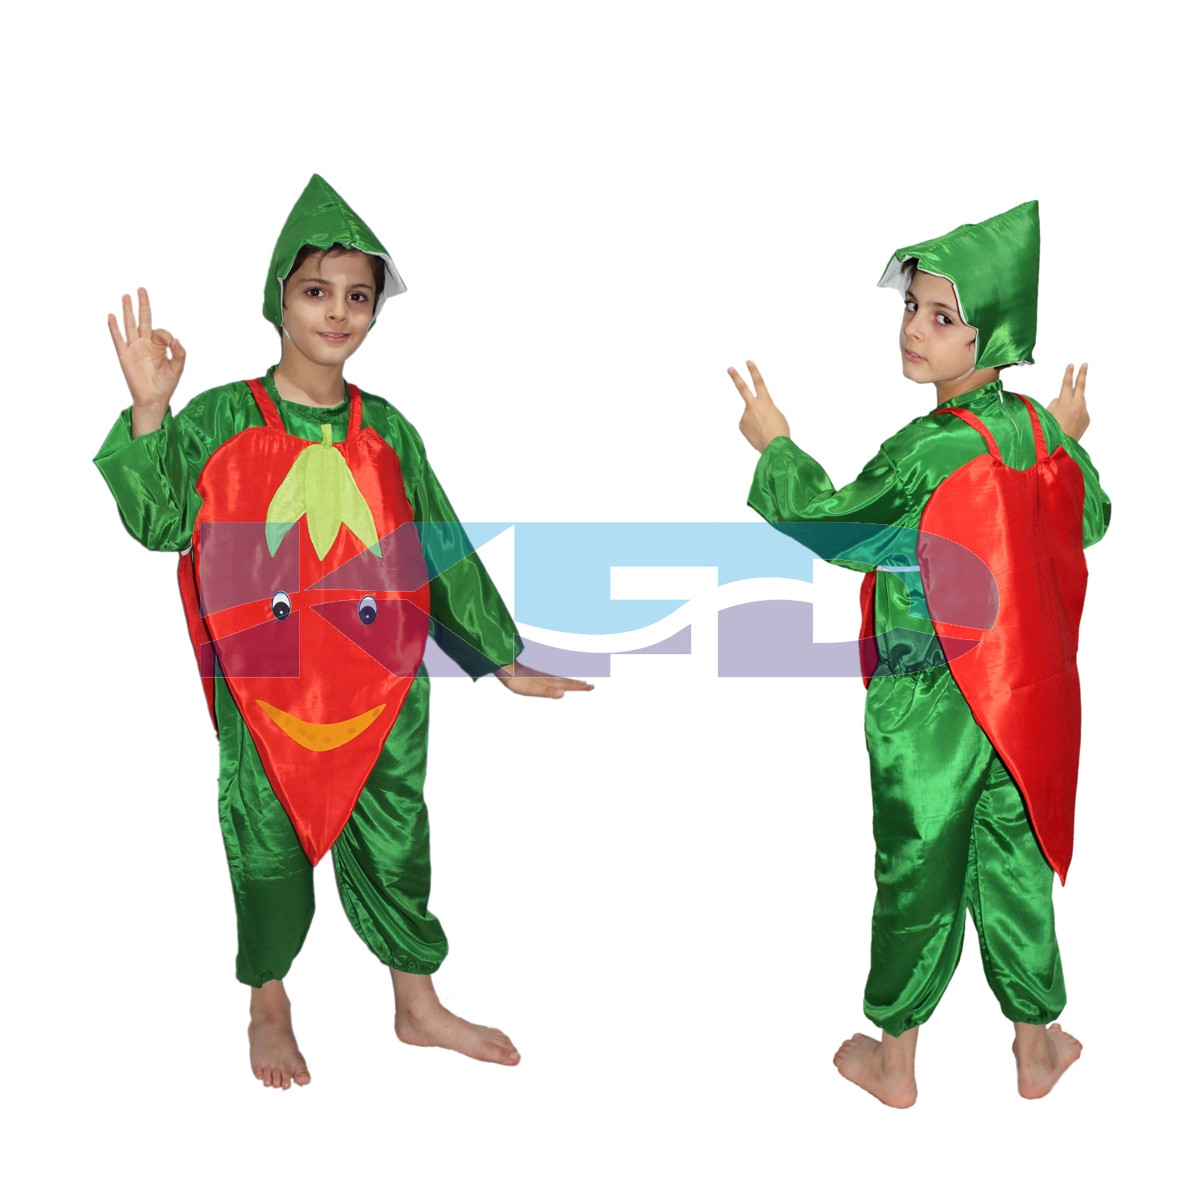 RedChilly fancy dress for kids,Vegetables Costume for School Annual function/Theme Party/Competition/Stage Shows Dress